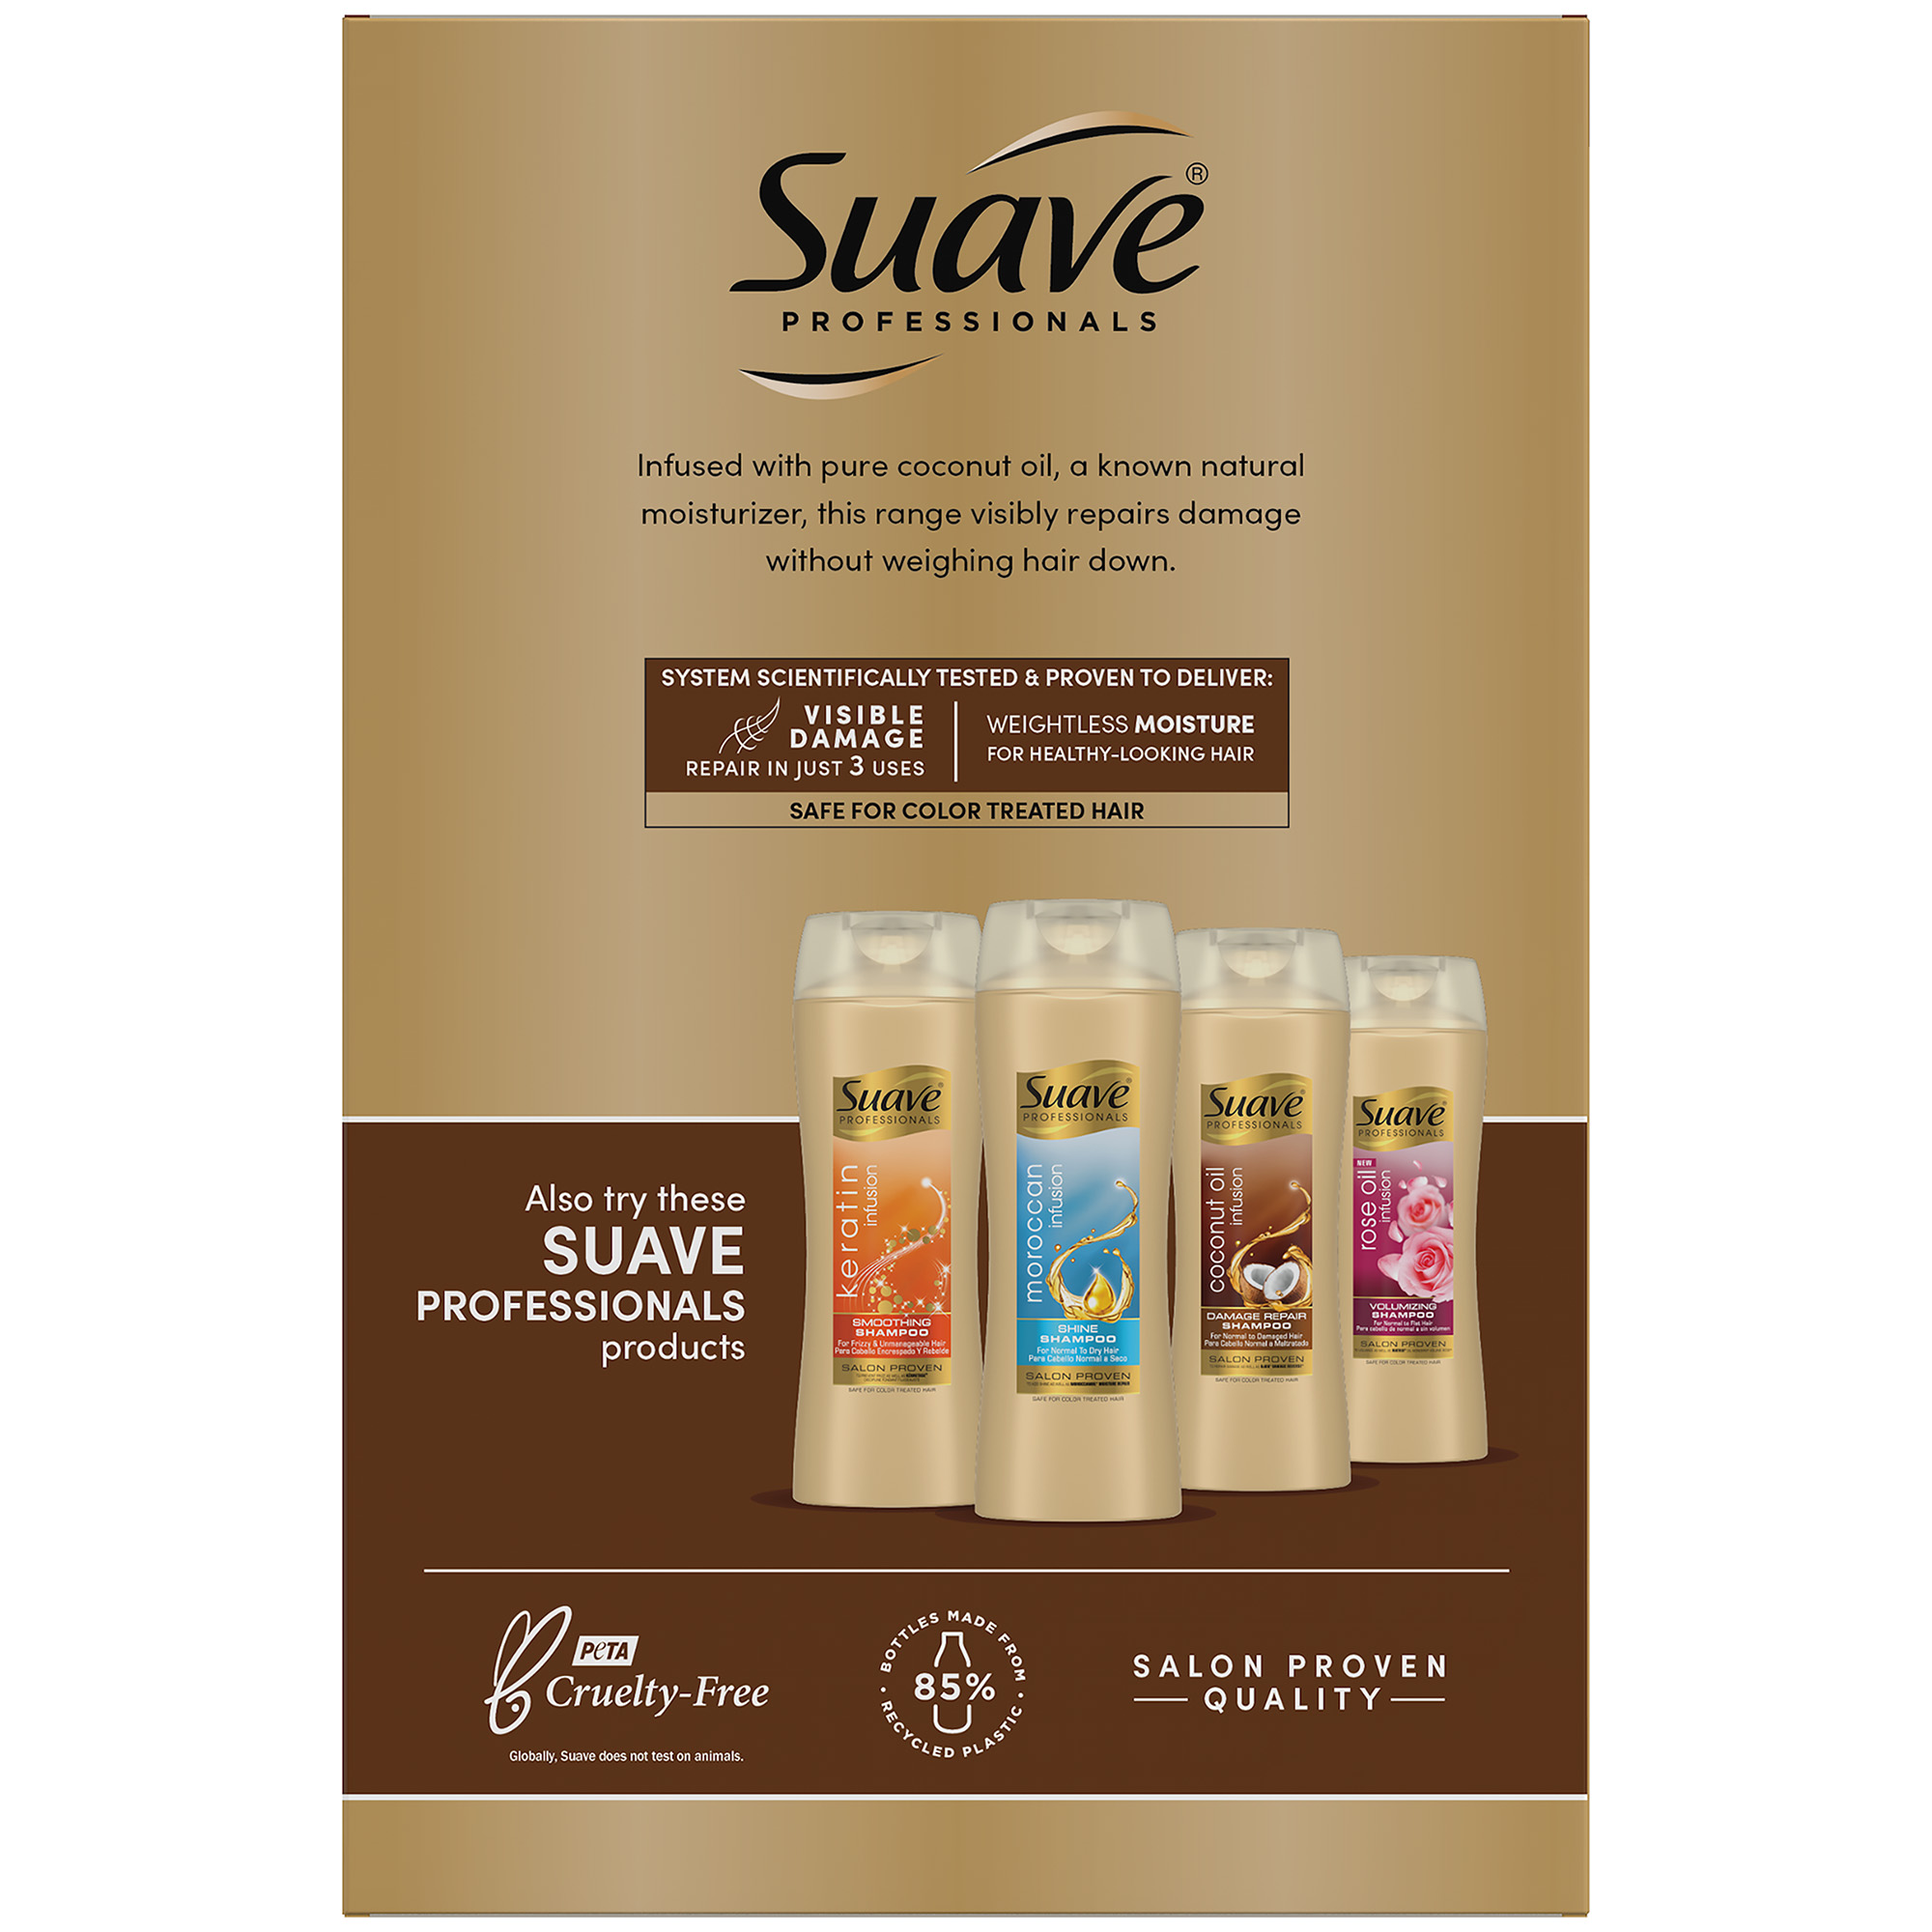 Suave Professionals Moisturizing Repairing Daily Shampoo & Conditioner with Coconut Oil, Full Size Set, 2 Pack - image 2 of 9